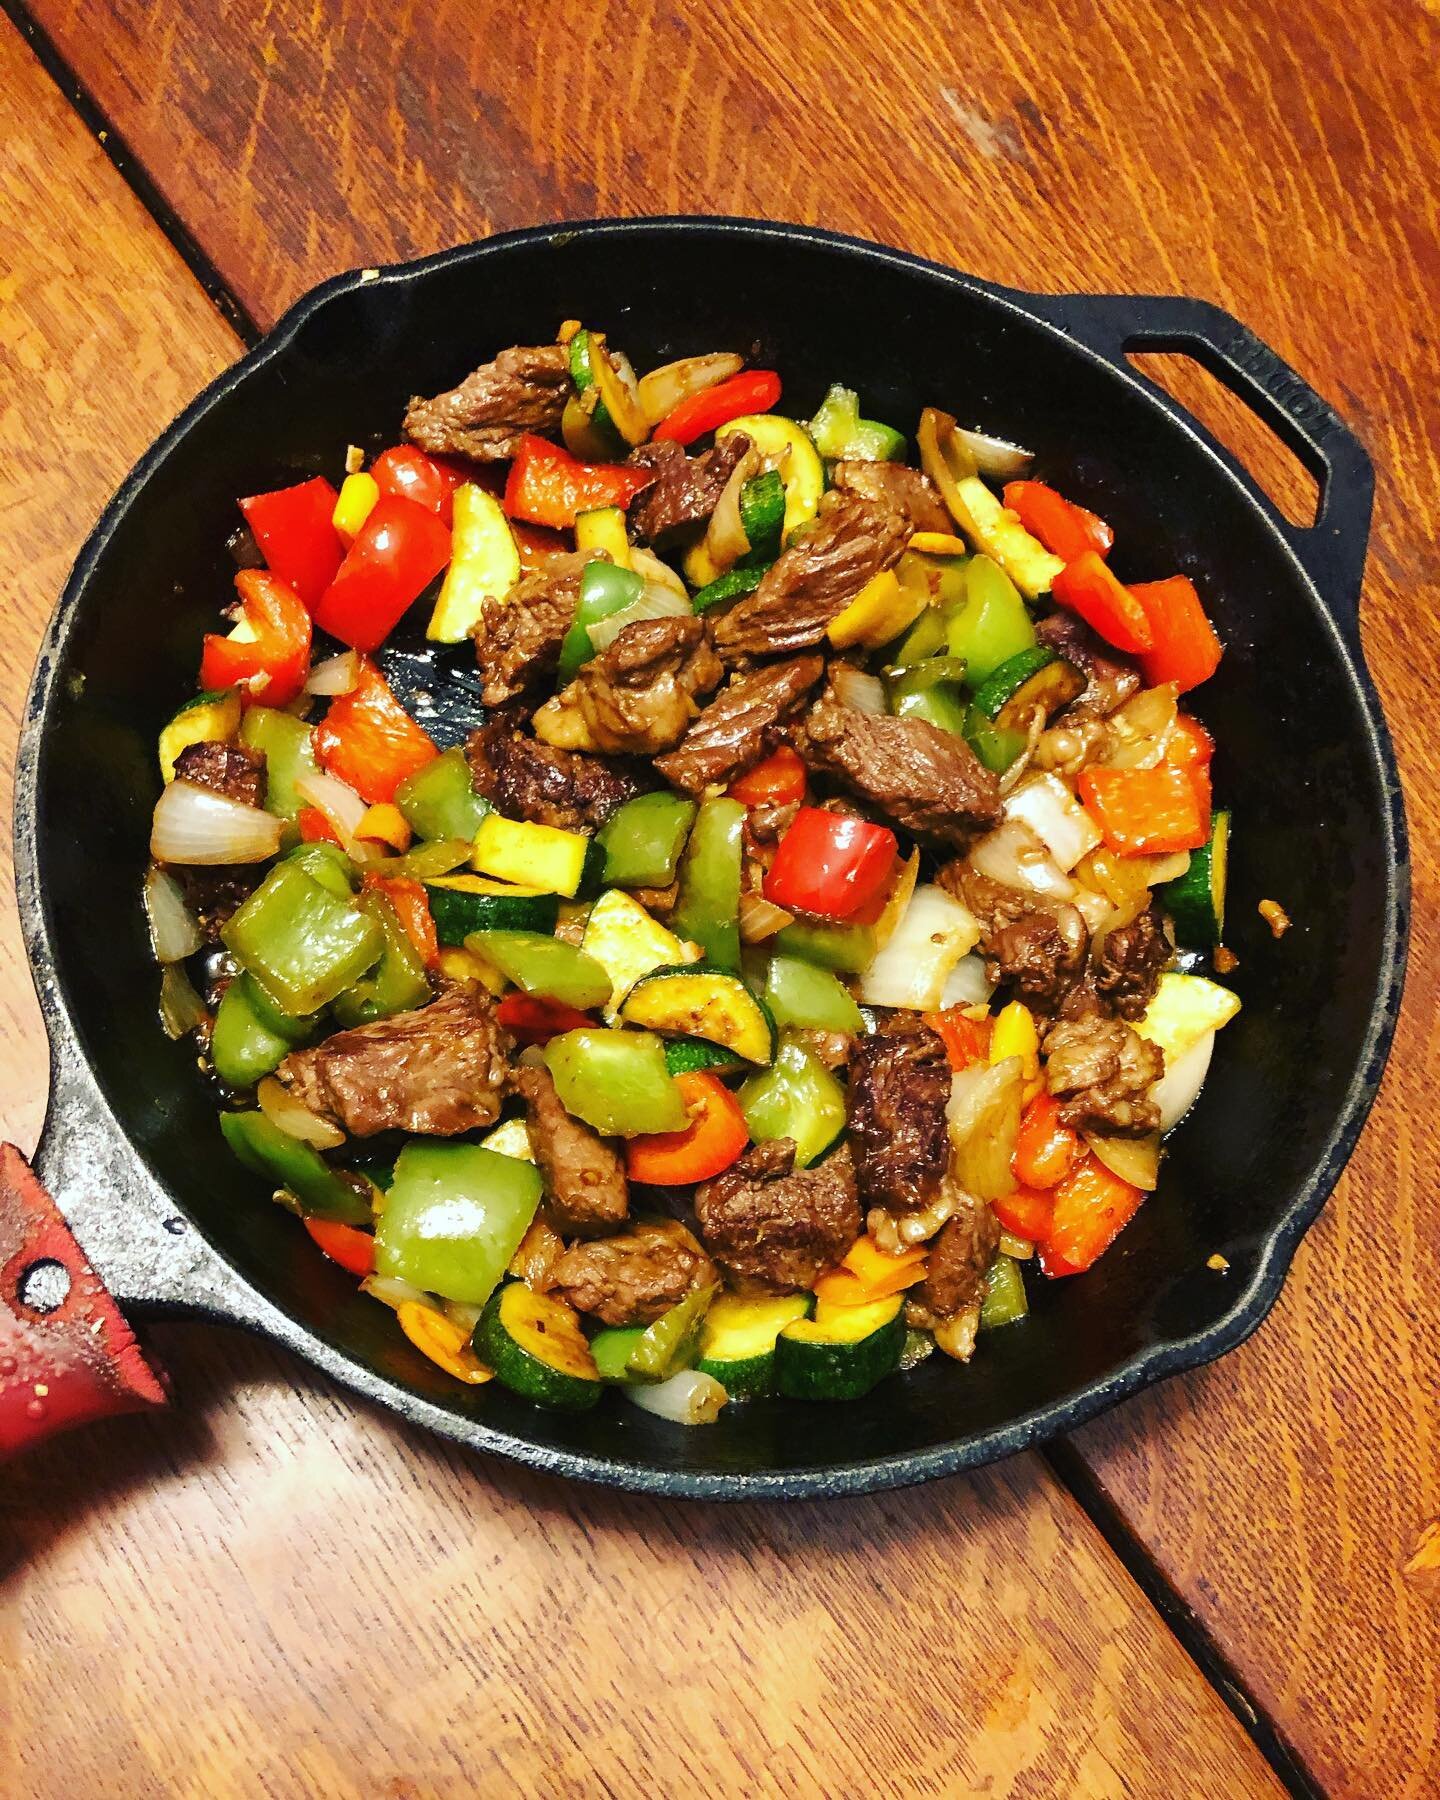 Shout out to @ilanainla who I recently came out to as a gluten free locavore omnivore after 15 years of being vegetarian/vegan. Here&rsquo;s my one skillet recipe, as requested: 1 large onion, bunch of chopped garlic, 3 bell peppers, 2 zucchini, and 